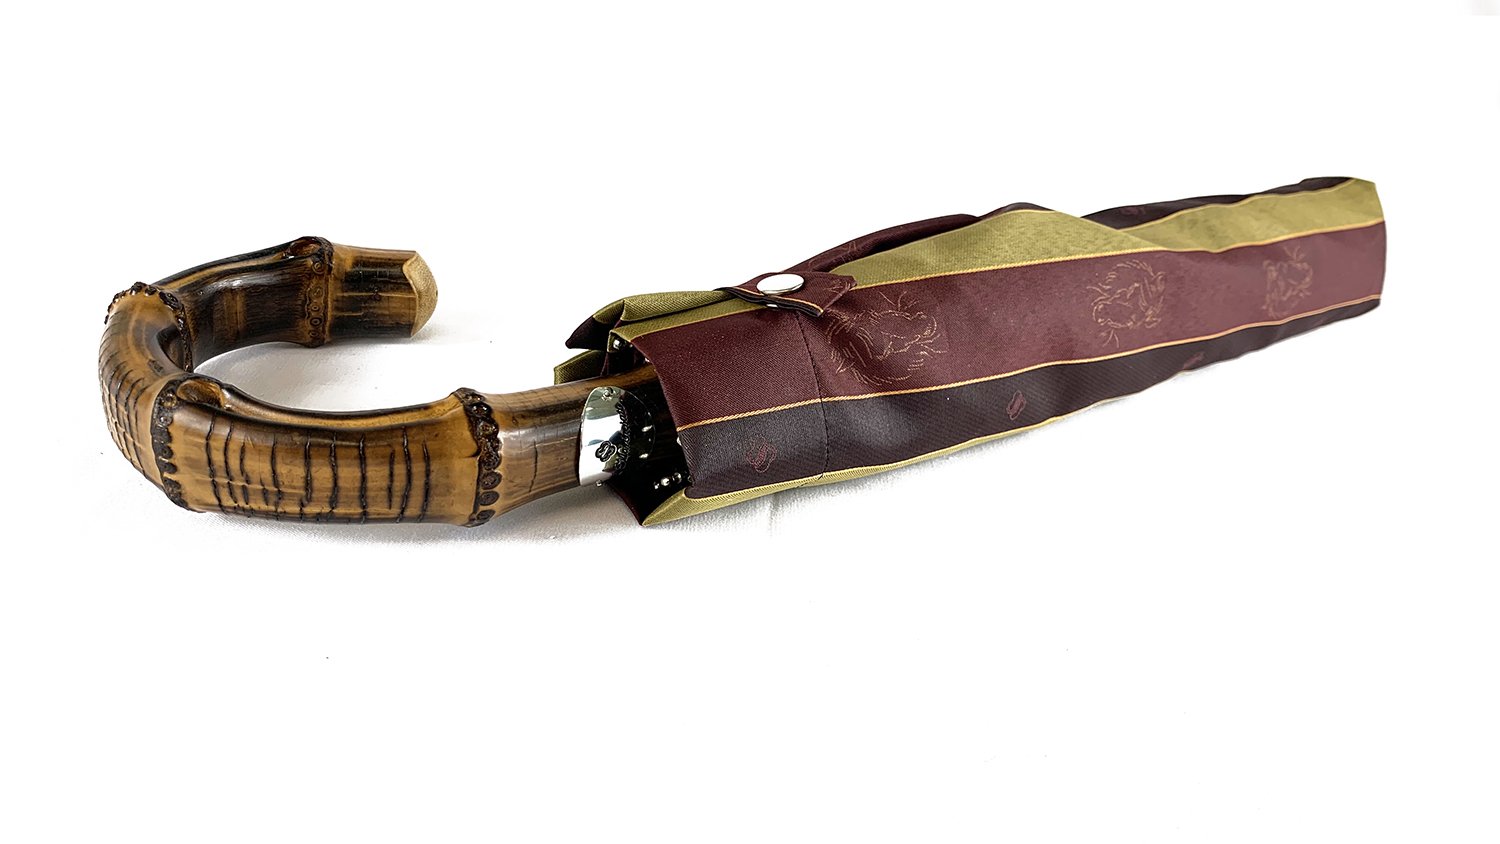 Striped Men's Umbrella with Horses and Bamboo Handle - IL MARCHESATO LUXURY UMBRELLAS, CANES AND SHOEHORNS